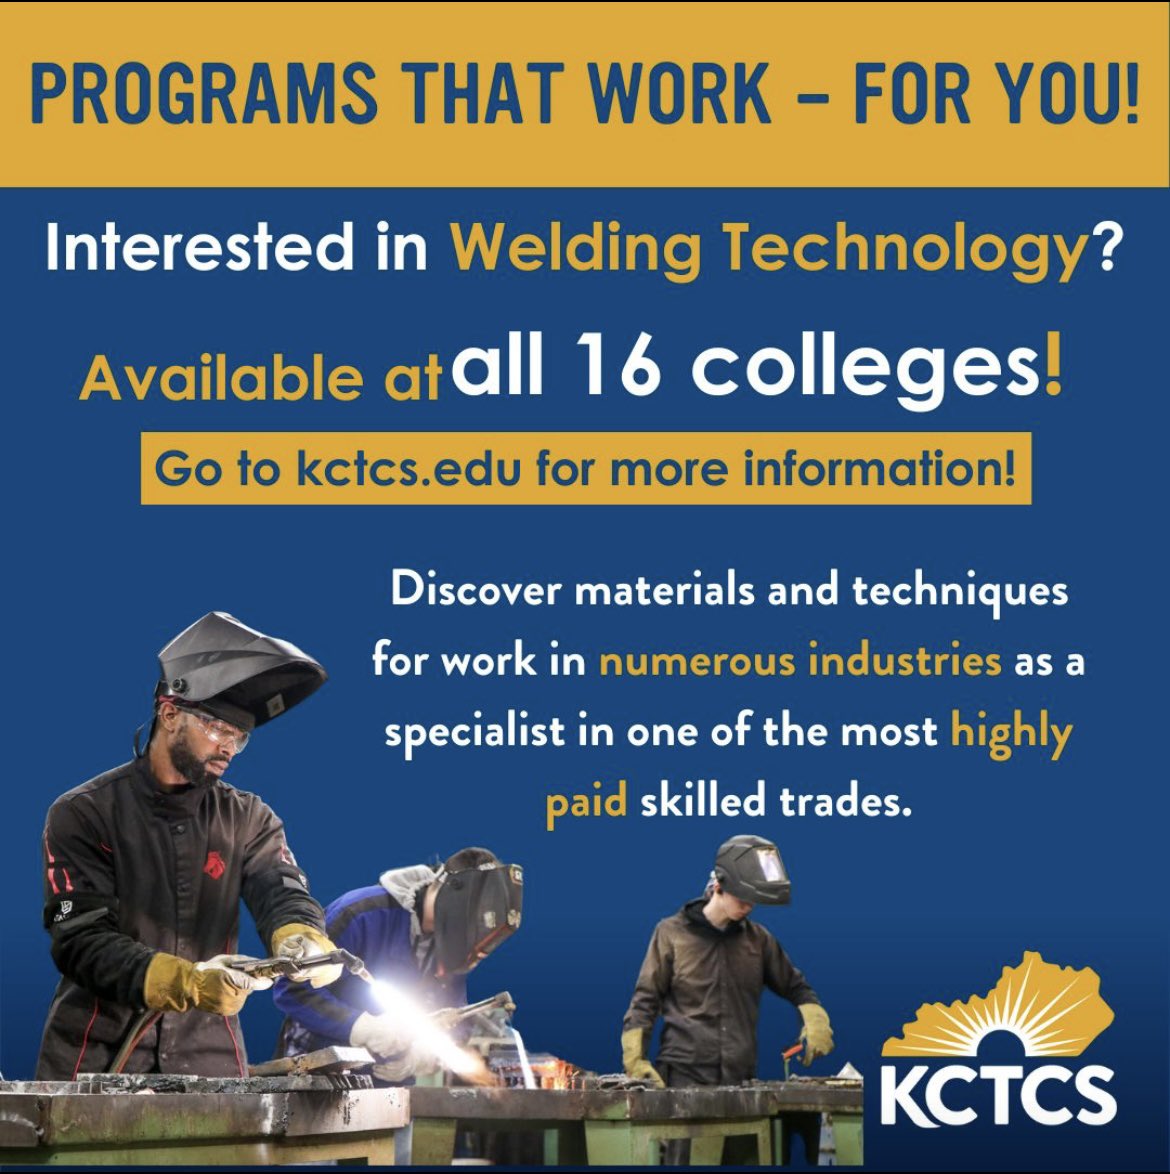 April is #NationalWeldingMonth. Welding is a highly paid skilled trade and with a nationwide shortage, it’s easy to find a job! Check out our Welding Technology paths across #KCTCS: kctcs.edu